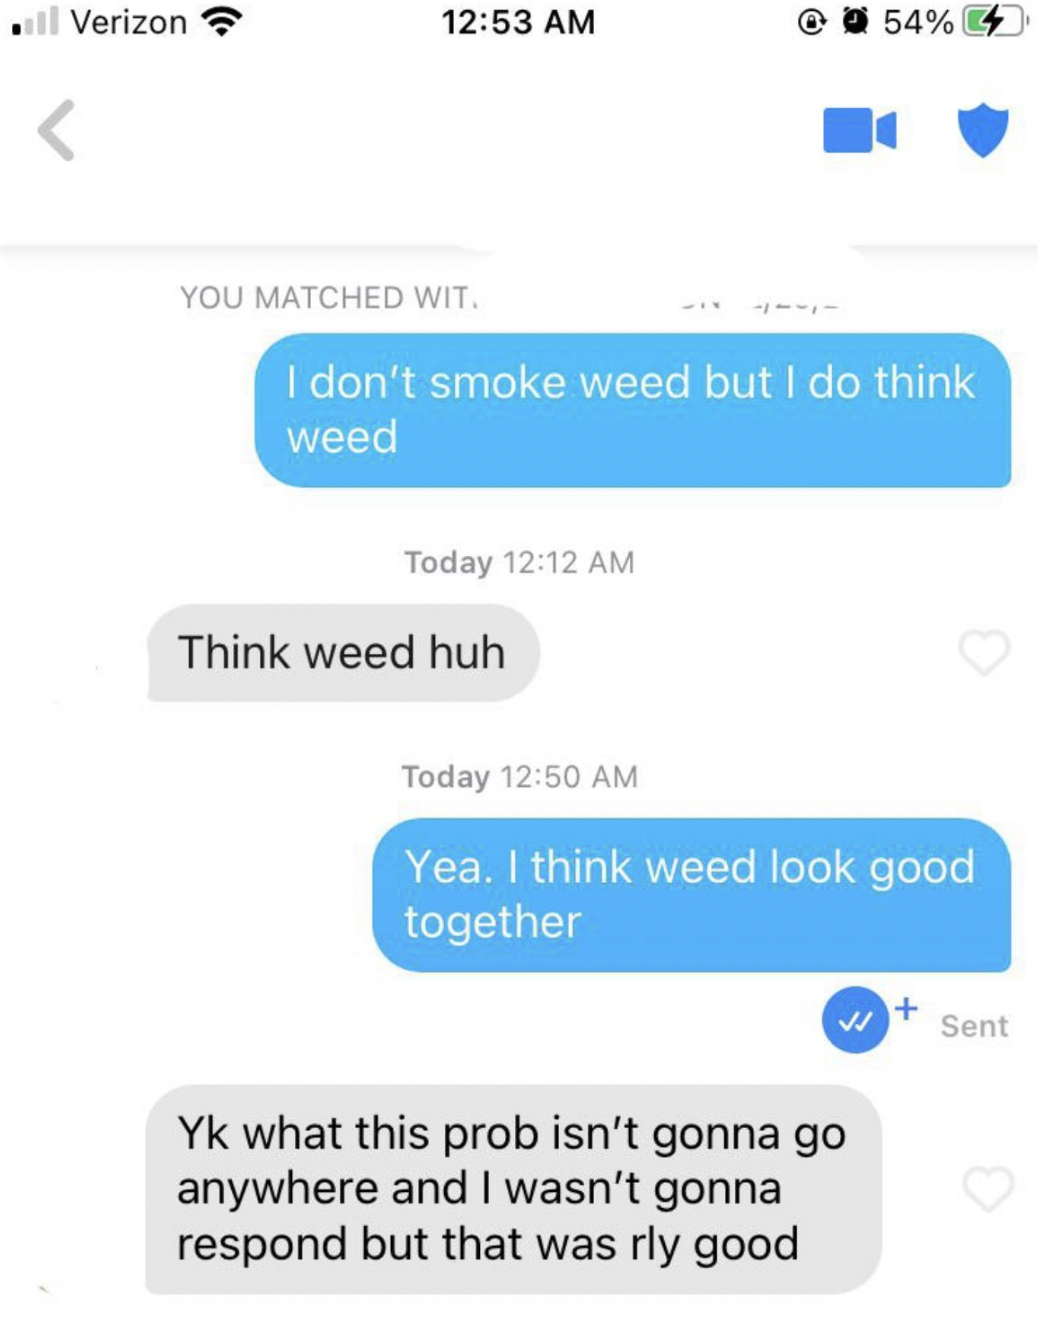 ll Verizon You Matched Wit. I don't smoke weed but I do think weed Today Think weed huh 54% 4 Today Yea. I think weed look good together Yk what this prob isn't gonna go anywhere and I wasn't gonna respond but that was rly good Sent